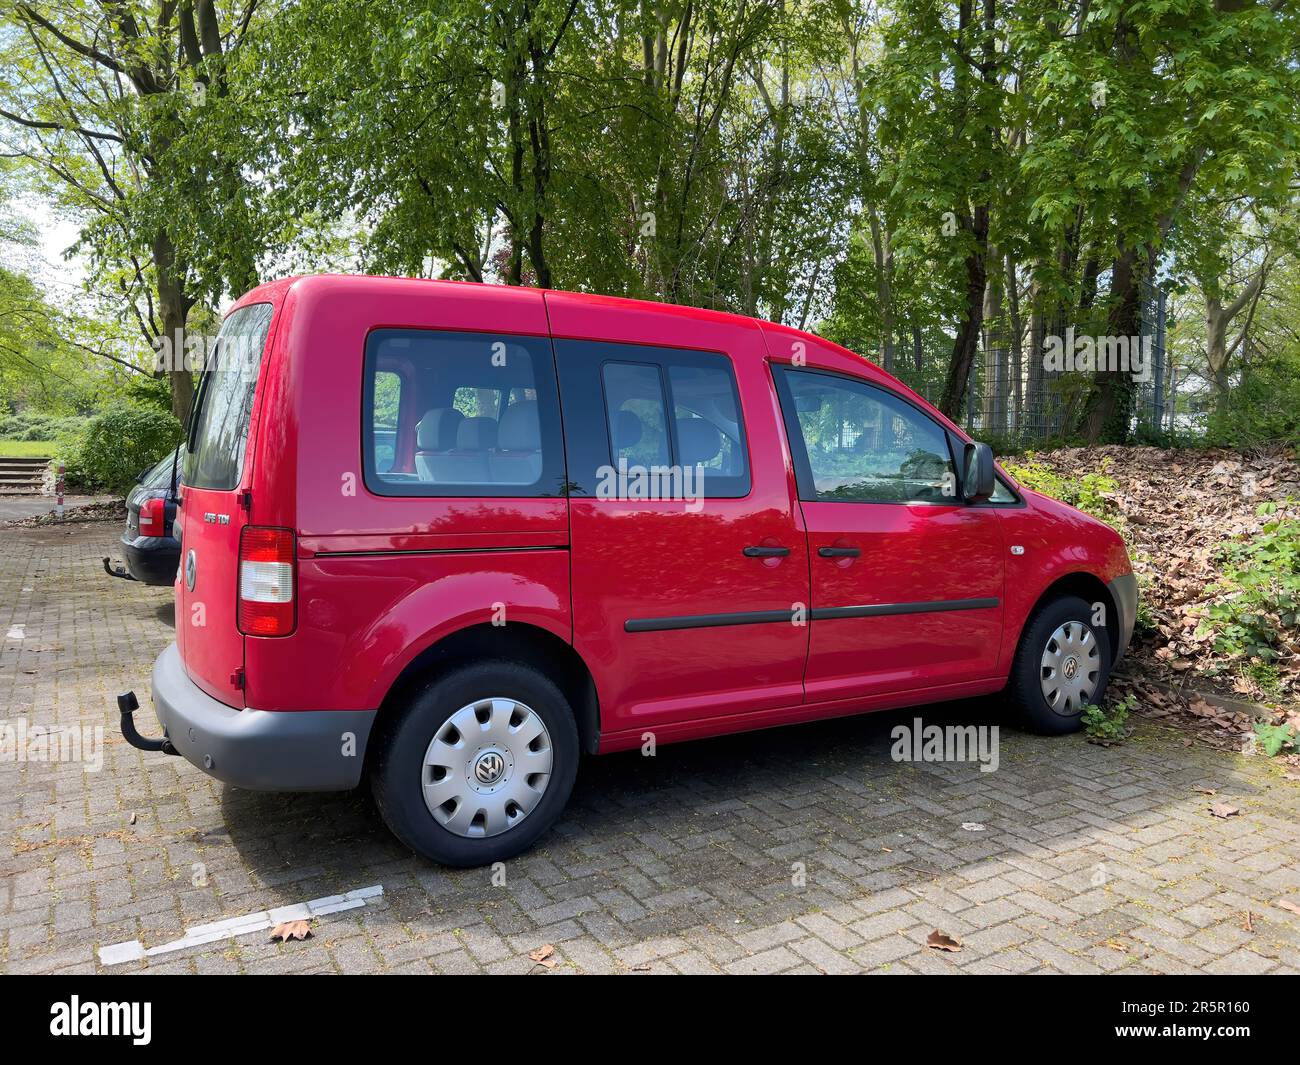 Kehl, Germany - May 1, 2023: A red VW Caddy Life is parked under a large tree amidst greenery. Its a diesel TDI model motor vehicle, perfect for commuting in traffic. Stock Photo